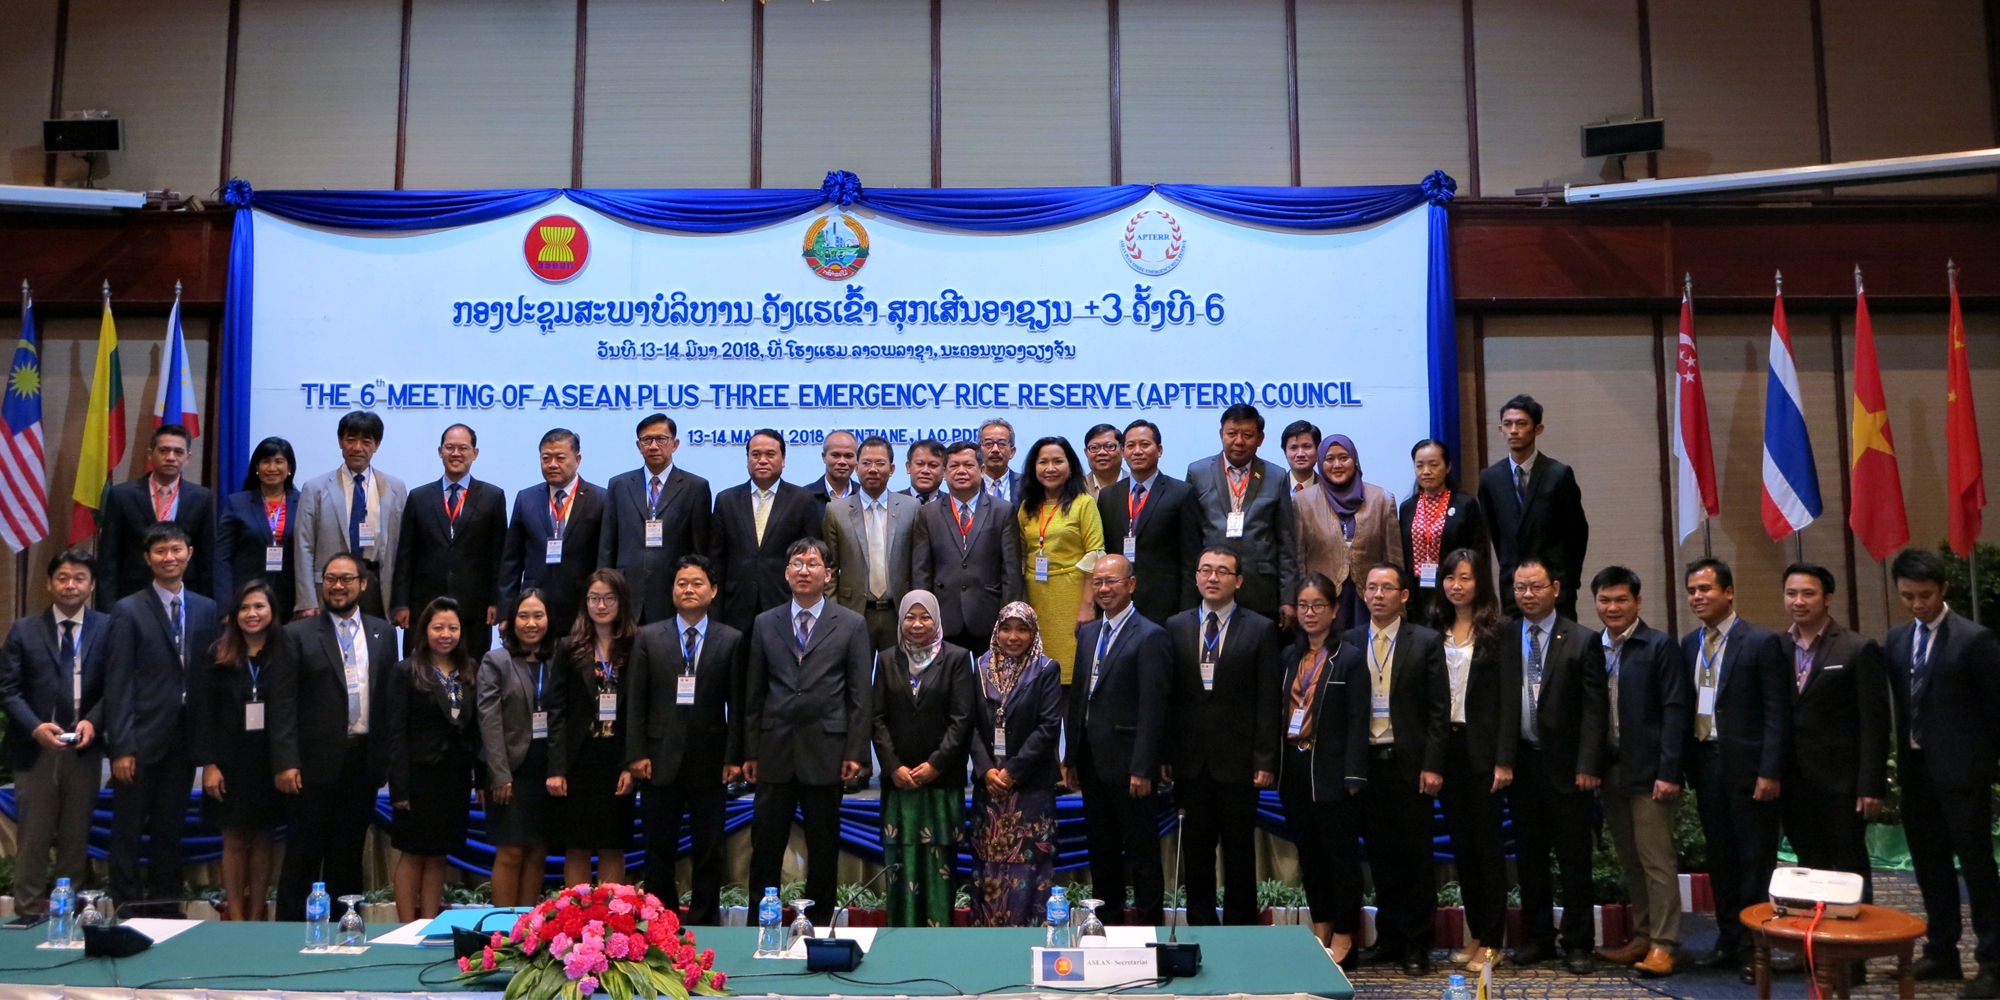 The 6<sup>th</sup> APTERR Council Meeting in Vientiane, Lao PDR on 13 – 14 March 2018